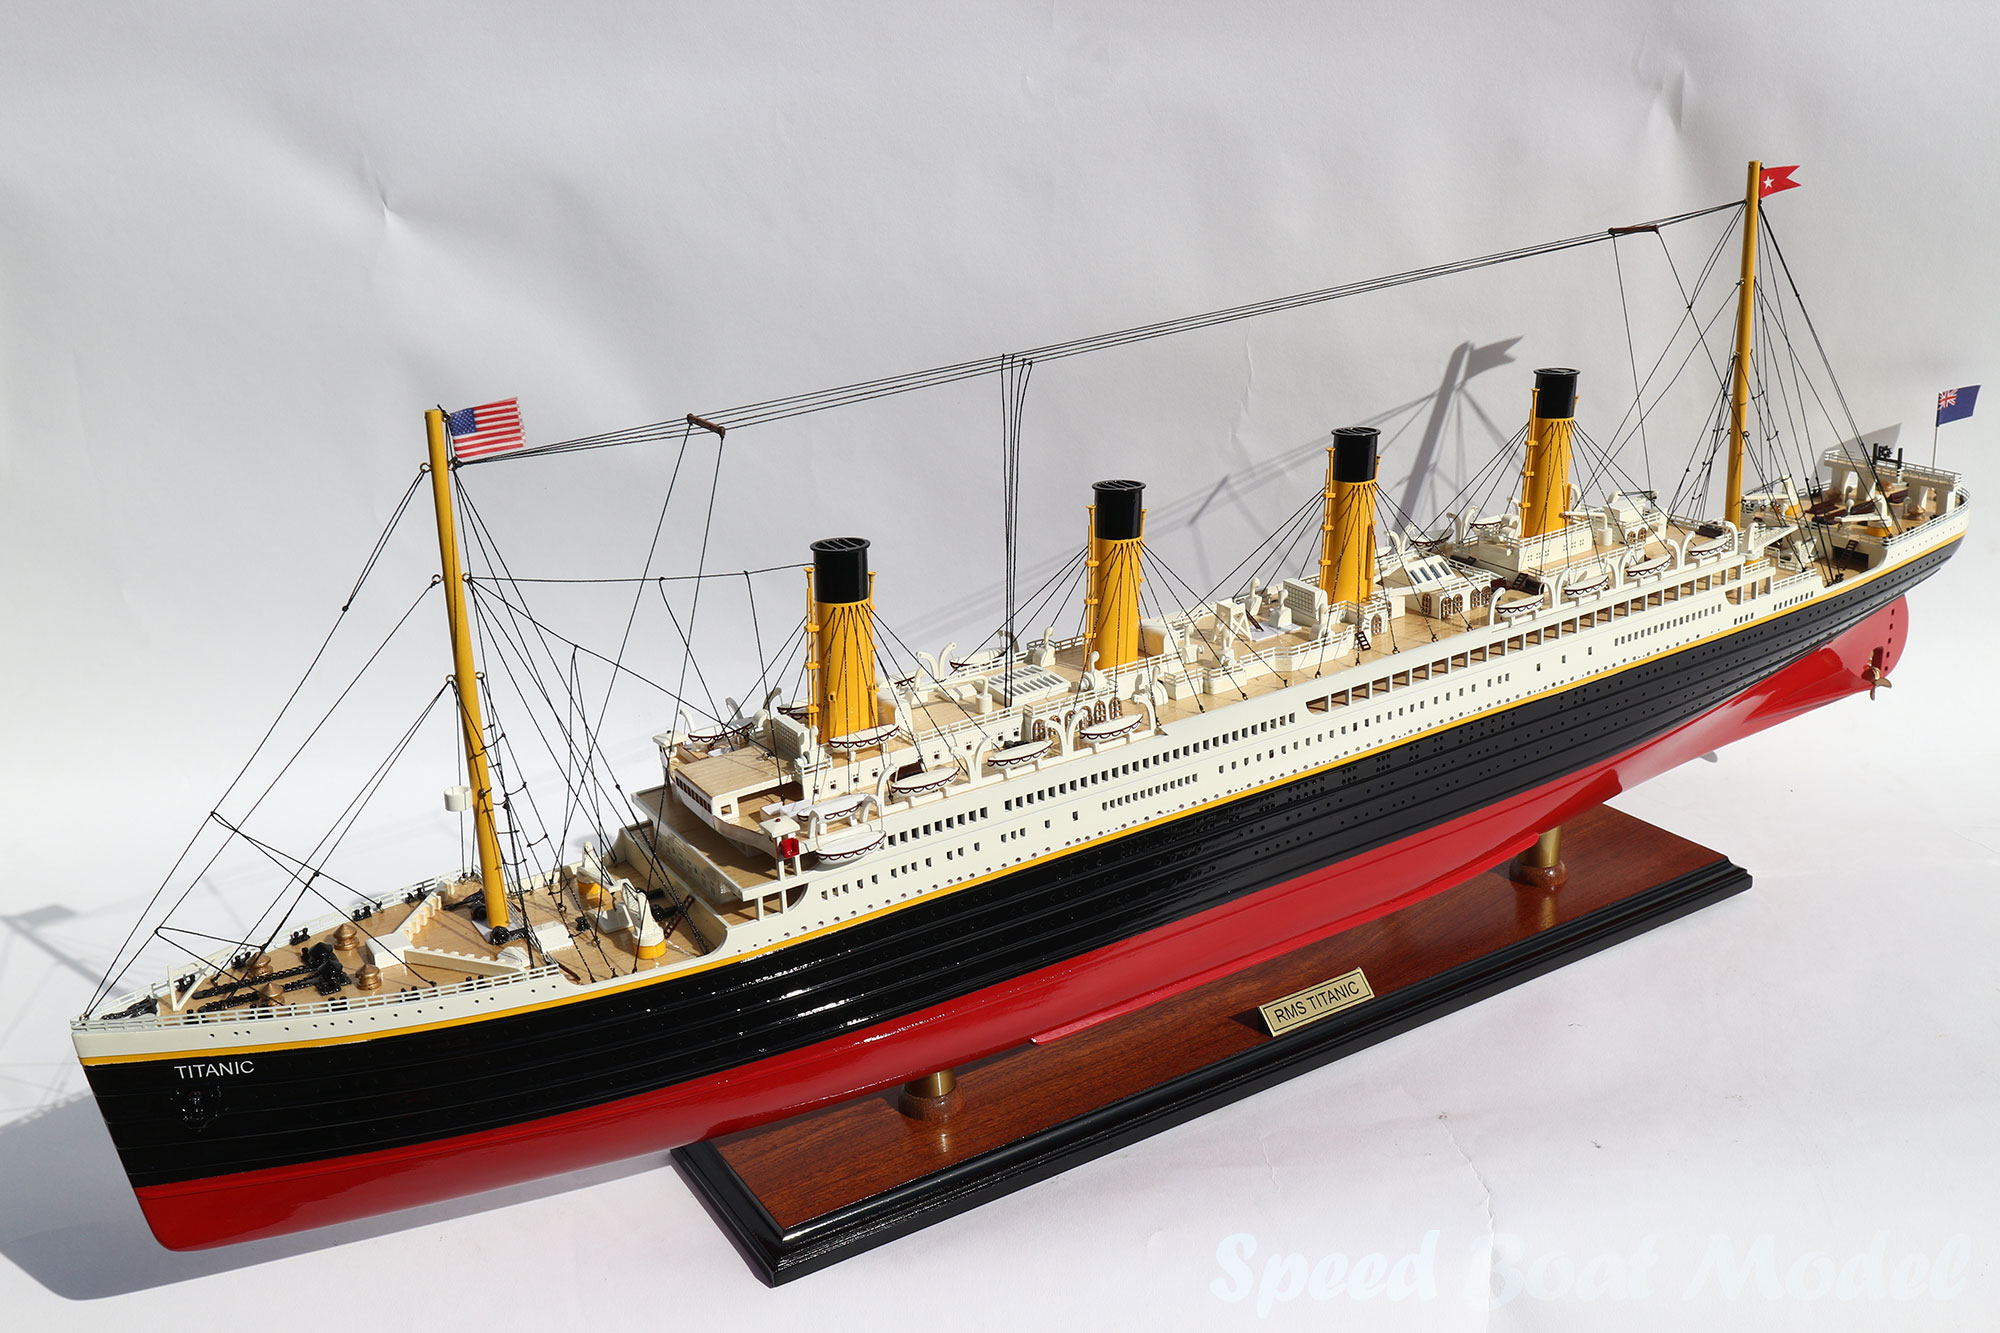 Rms Titanic (Special Edition) Ocean Liner Model 39.3"